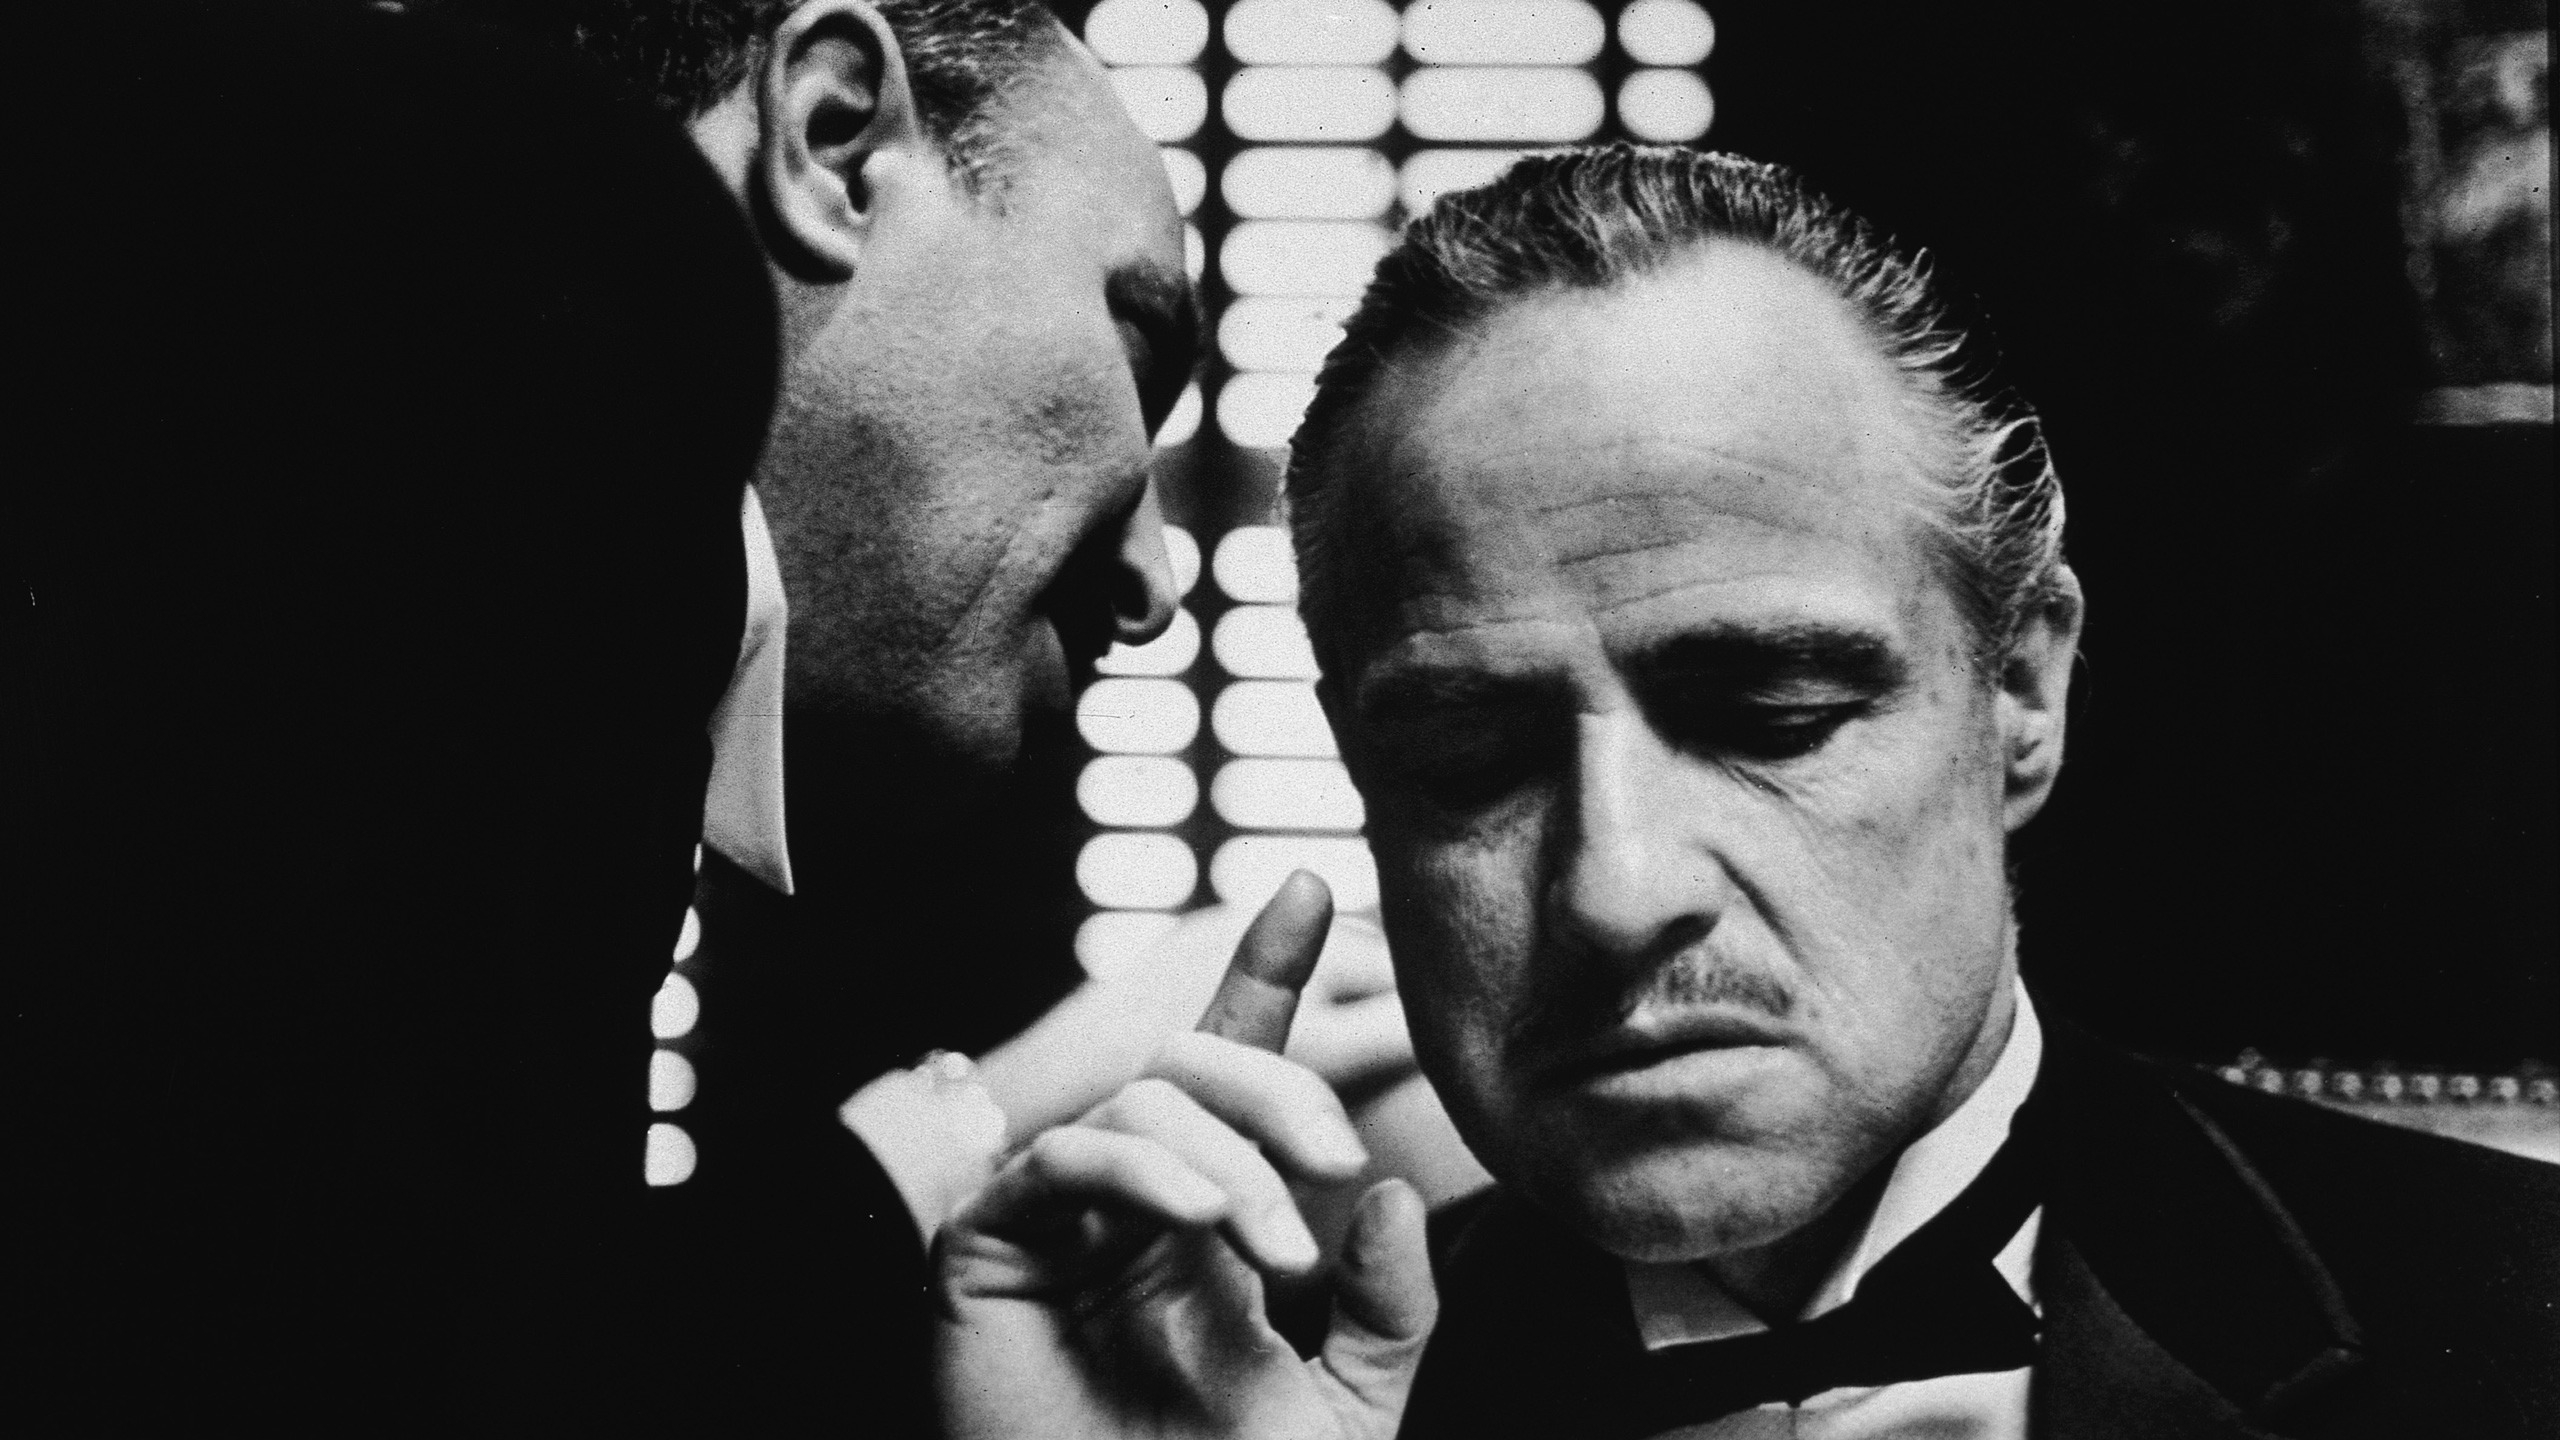 The Godfather for 2560x1440 HDTV resolution